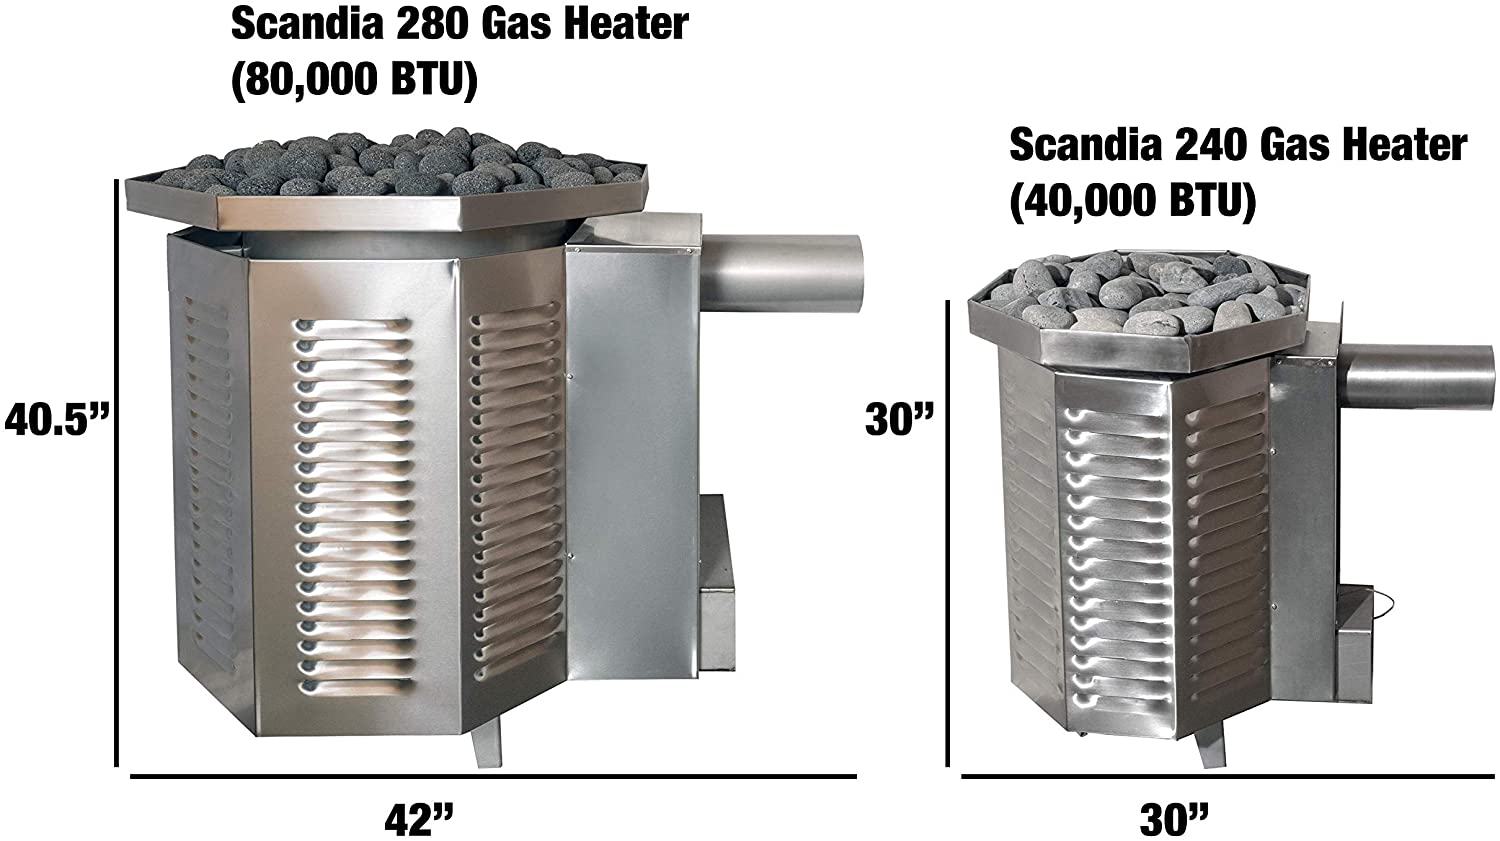 Scandia 280 and 240 Heaters With Specs